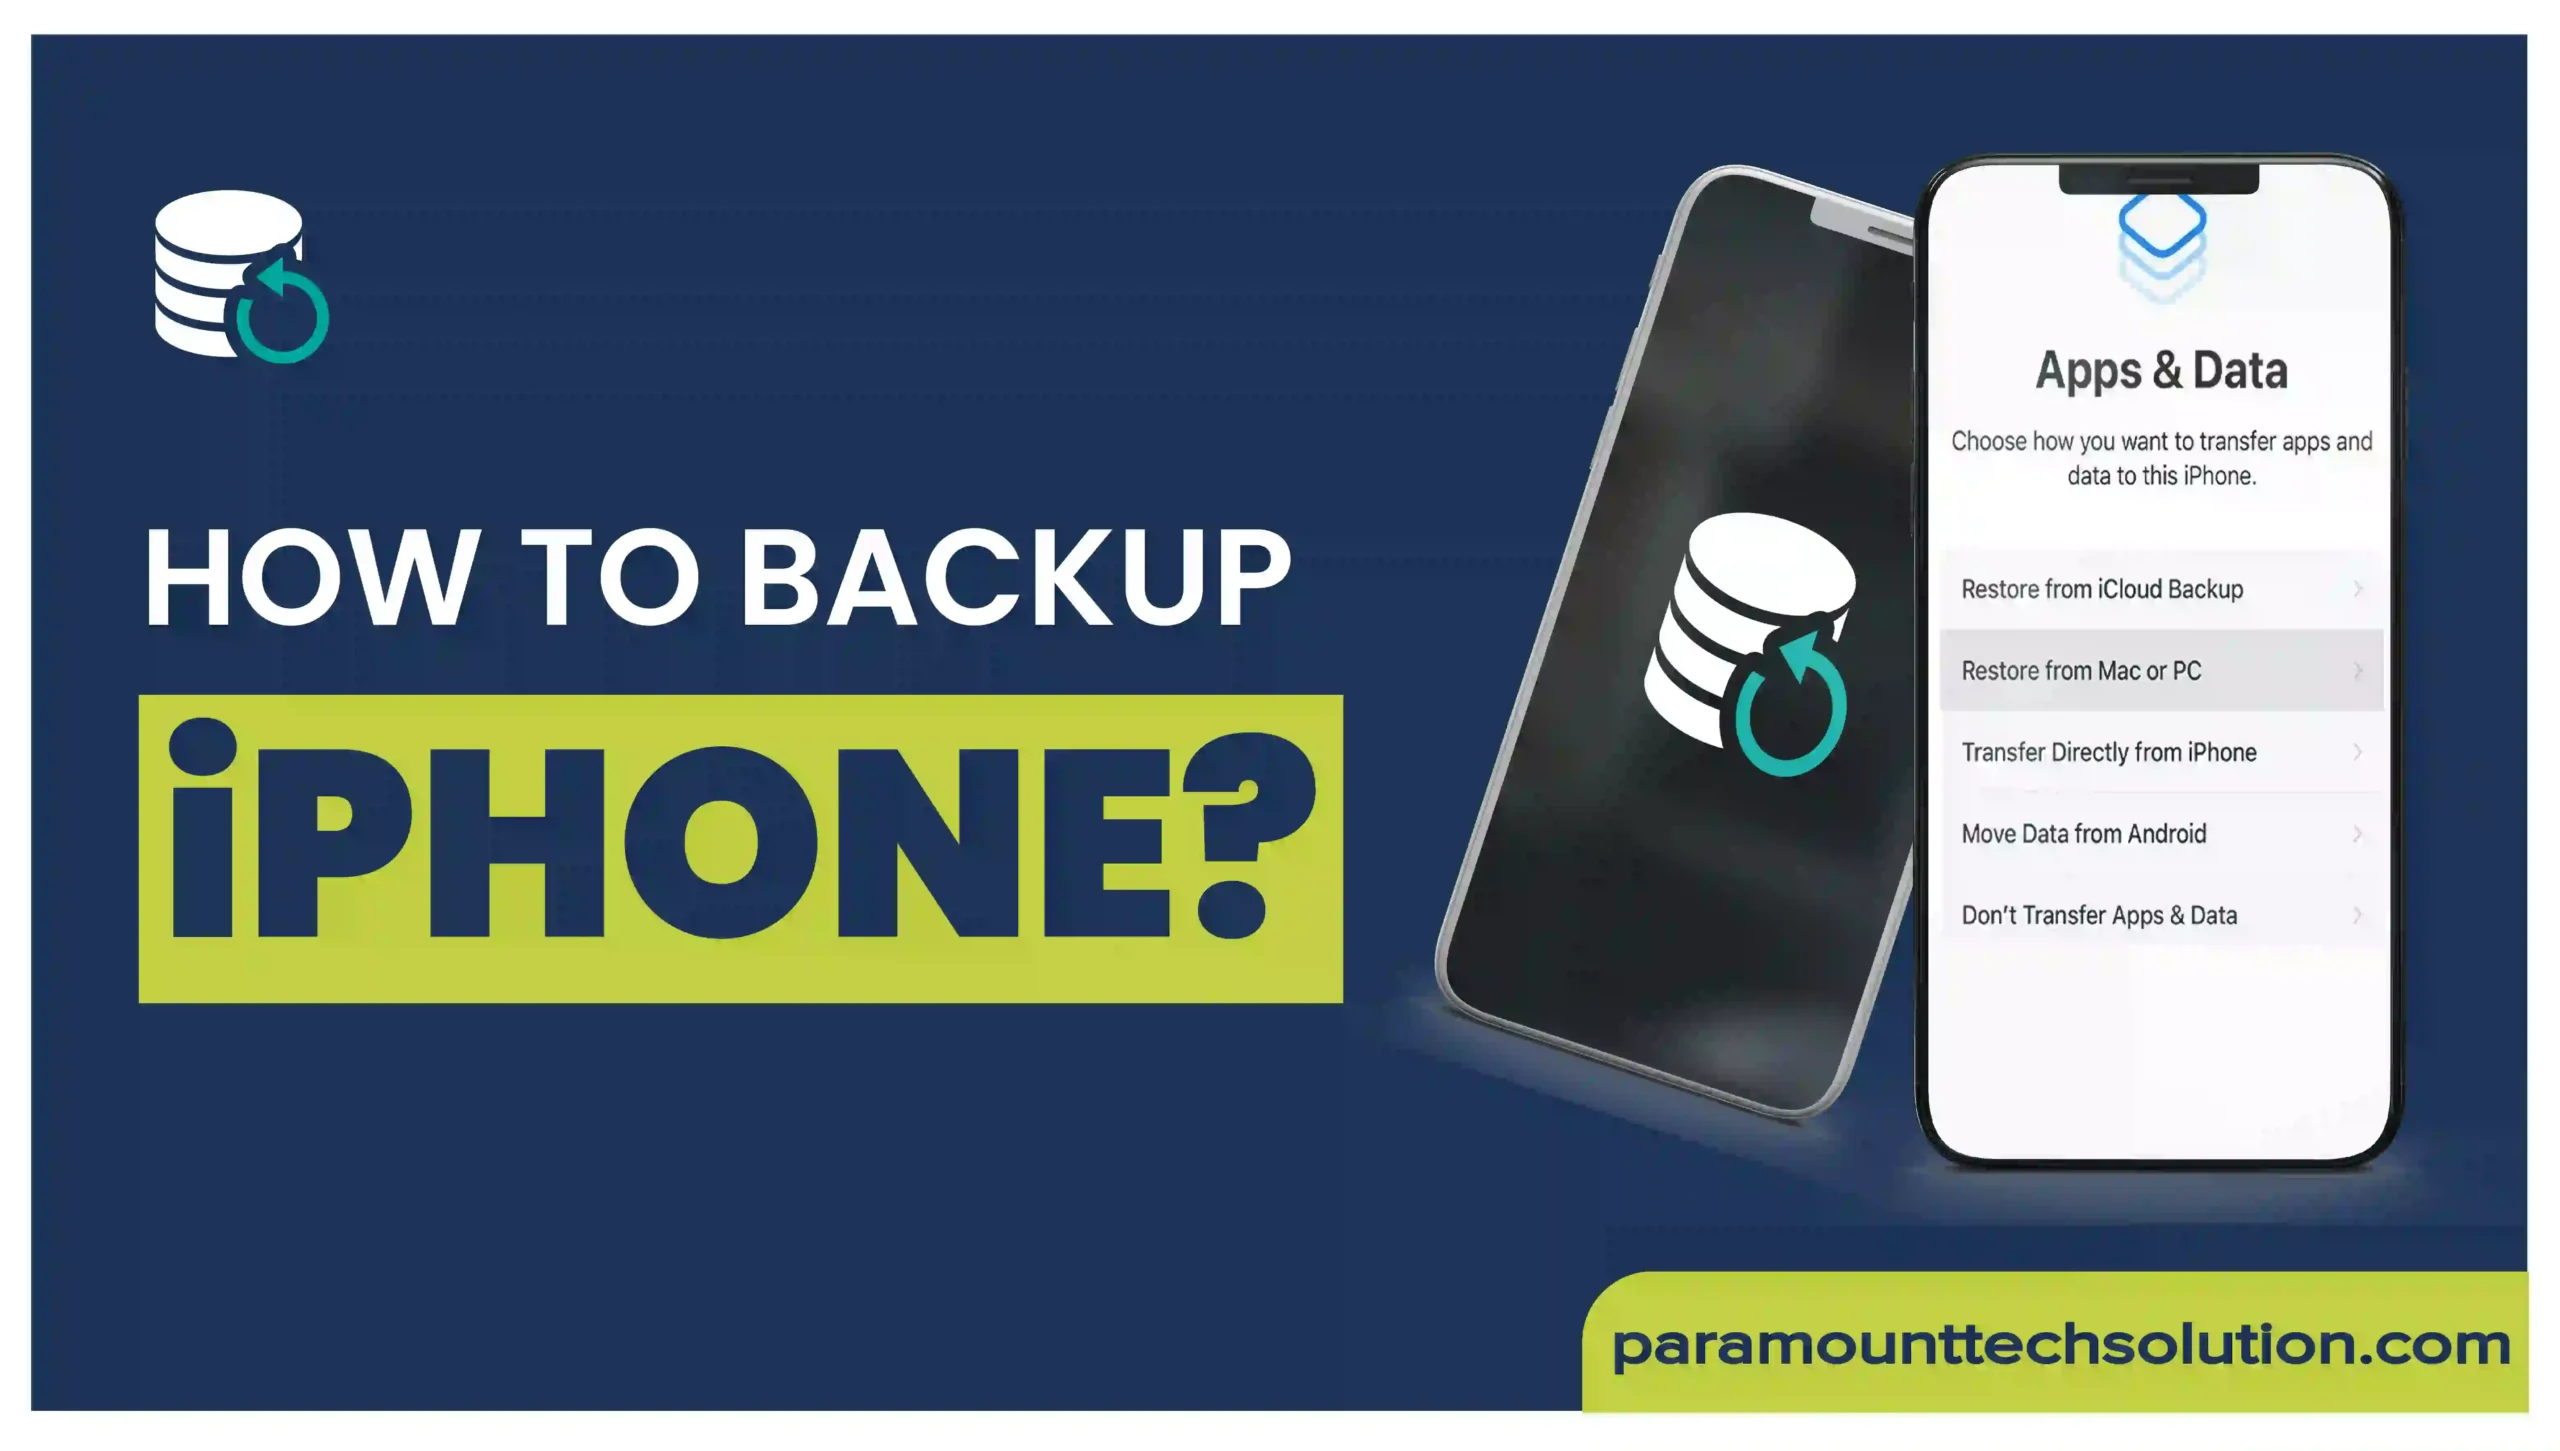 How to Backup iPhone-4 Easy Ways to Backup